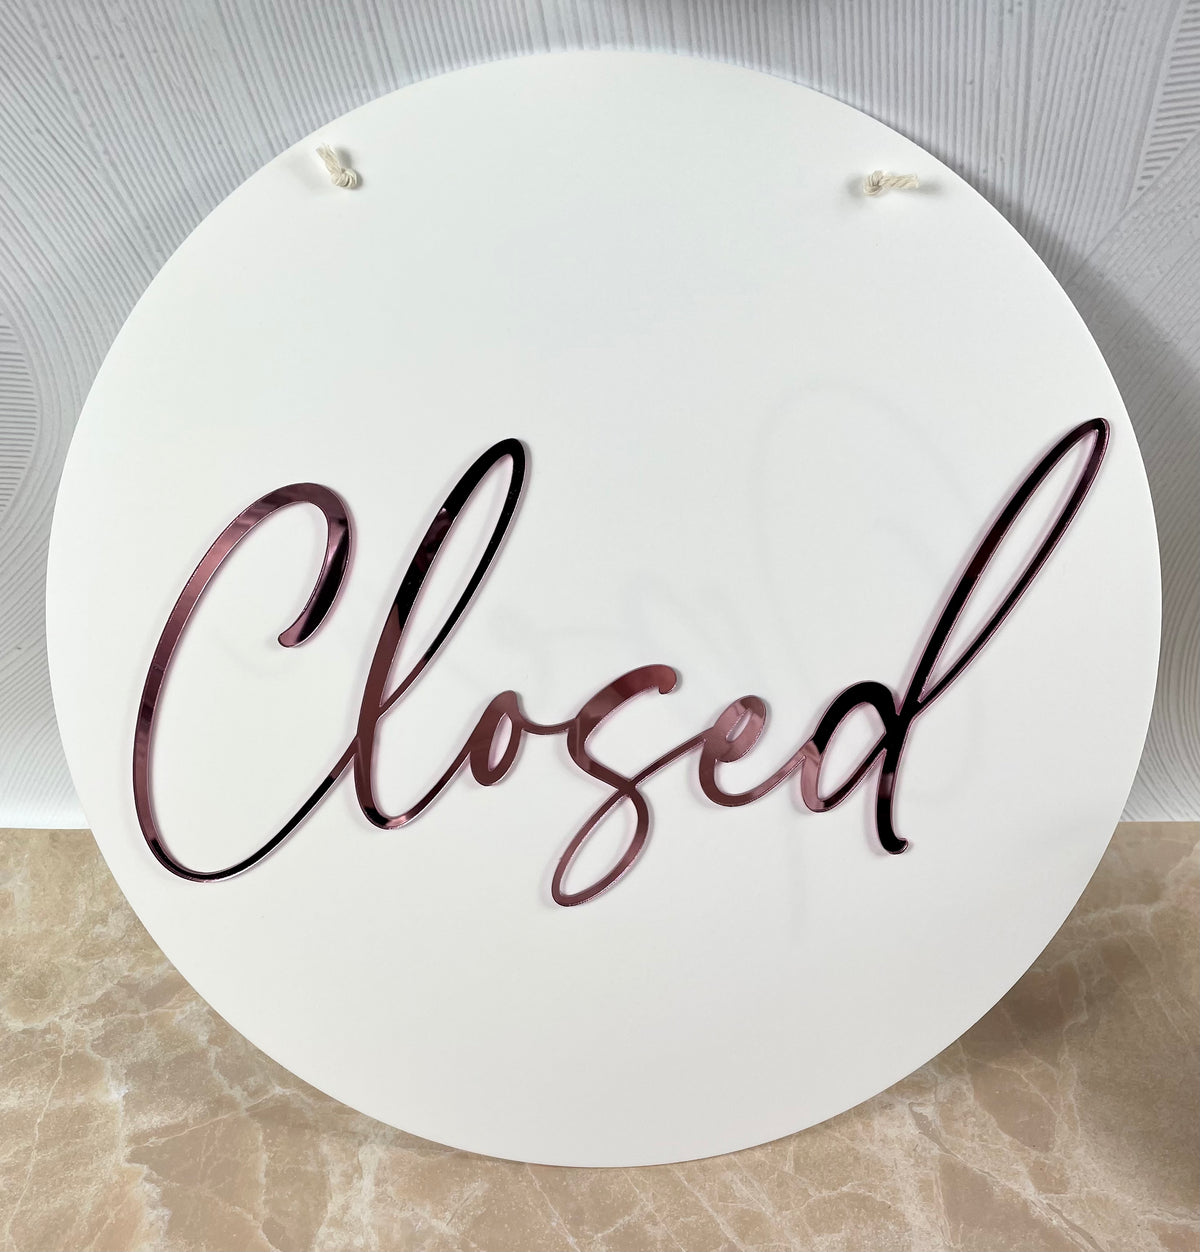 white and pink closed sign